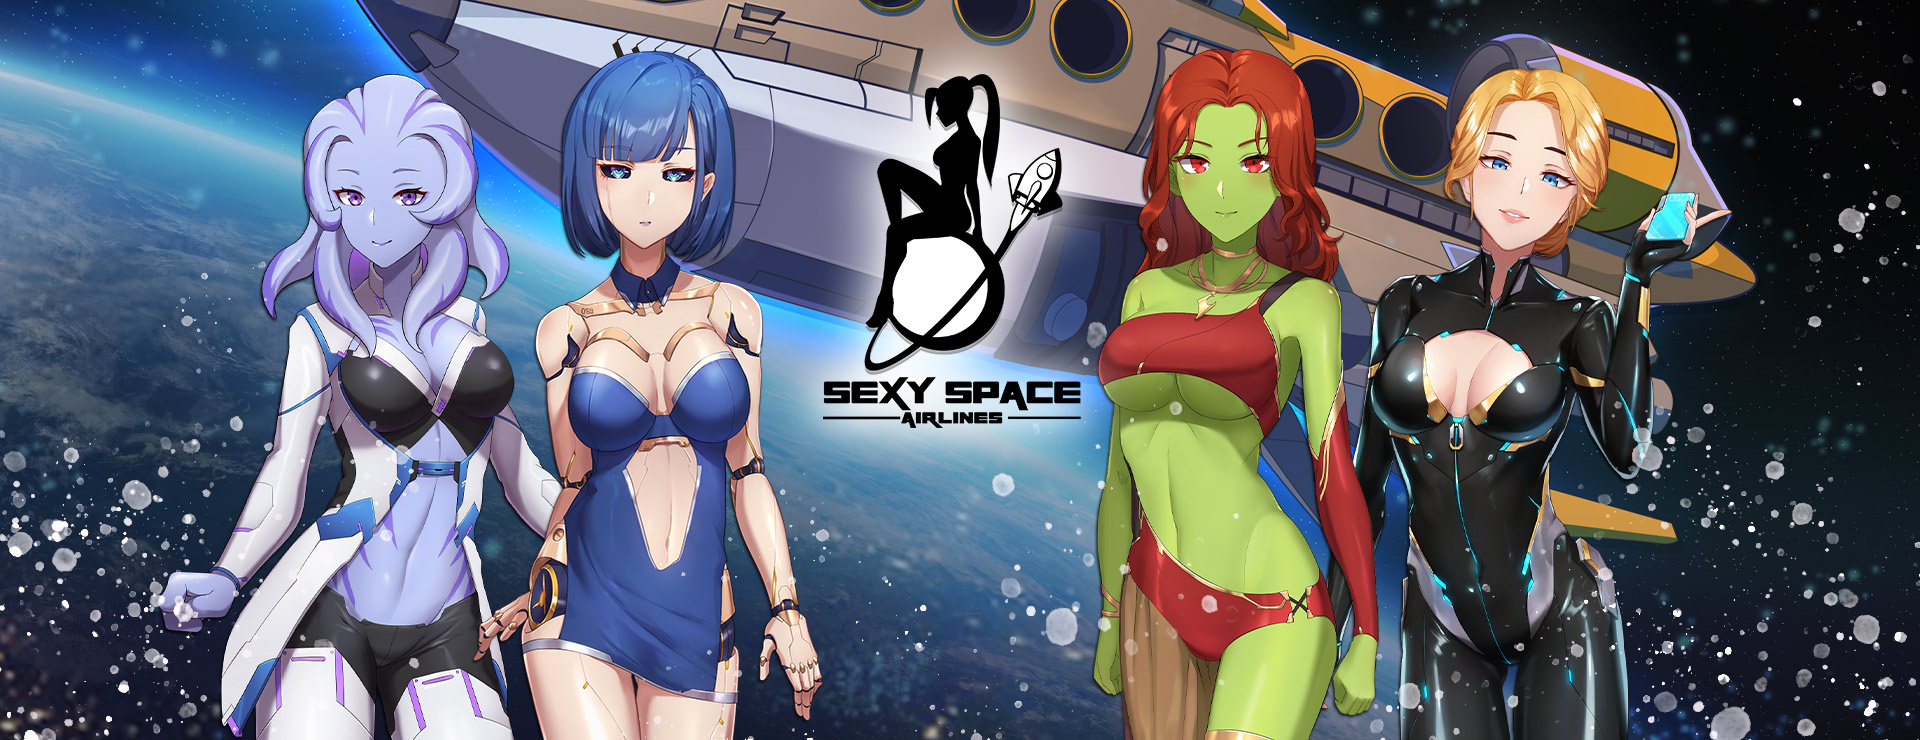 Sexy Space Airlines Game - アクションアドベンチャー ゲーム